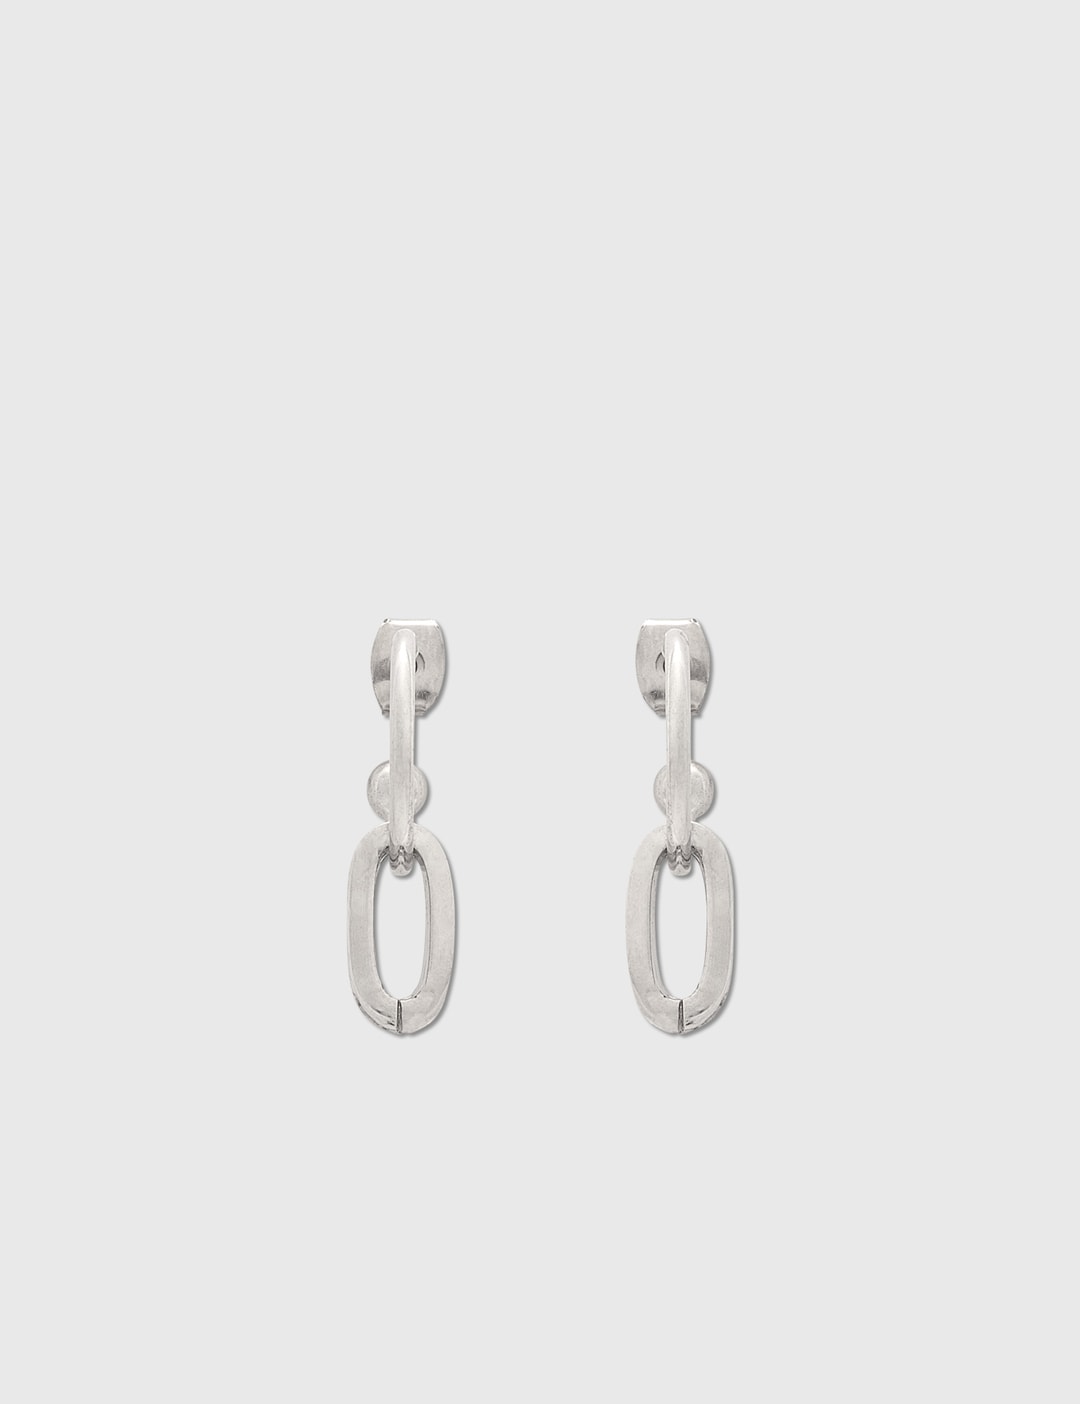 Justine Clenquet - Debbie Earrings | HBX - Globally Curated Fashion and ...